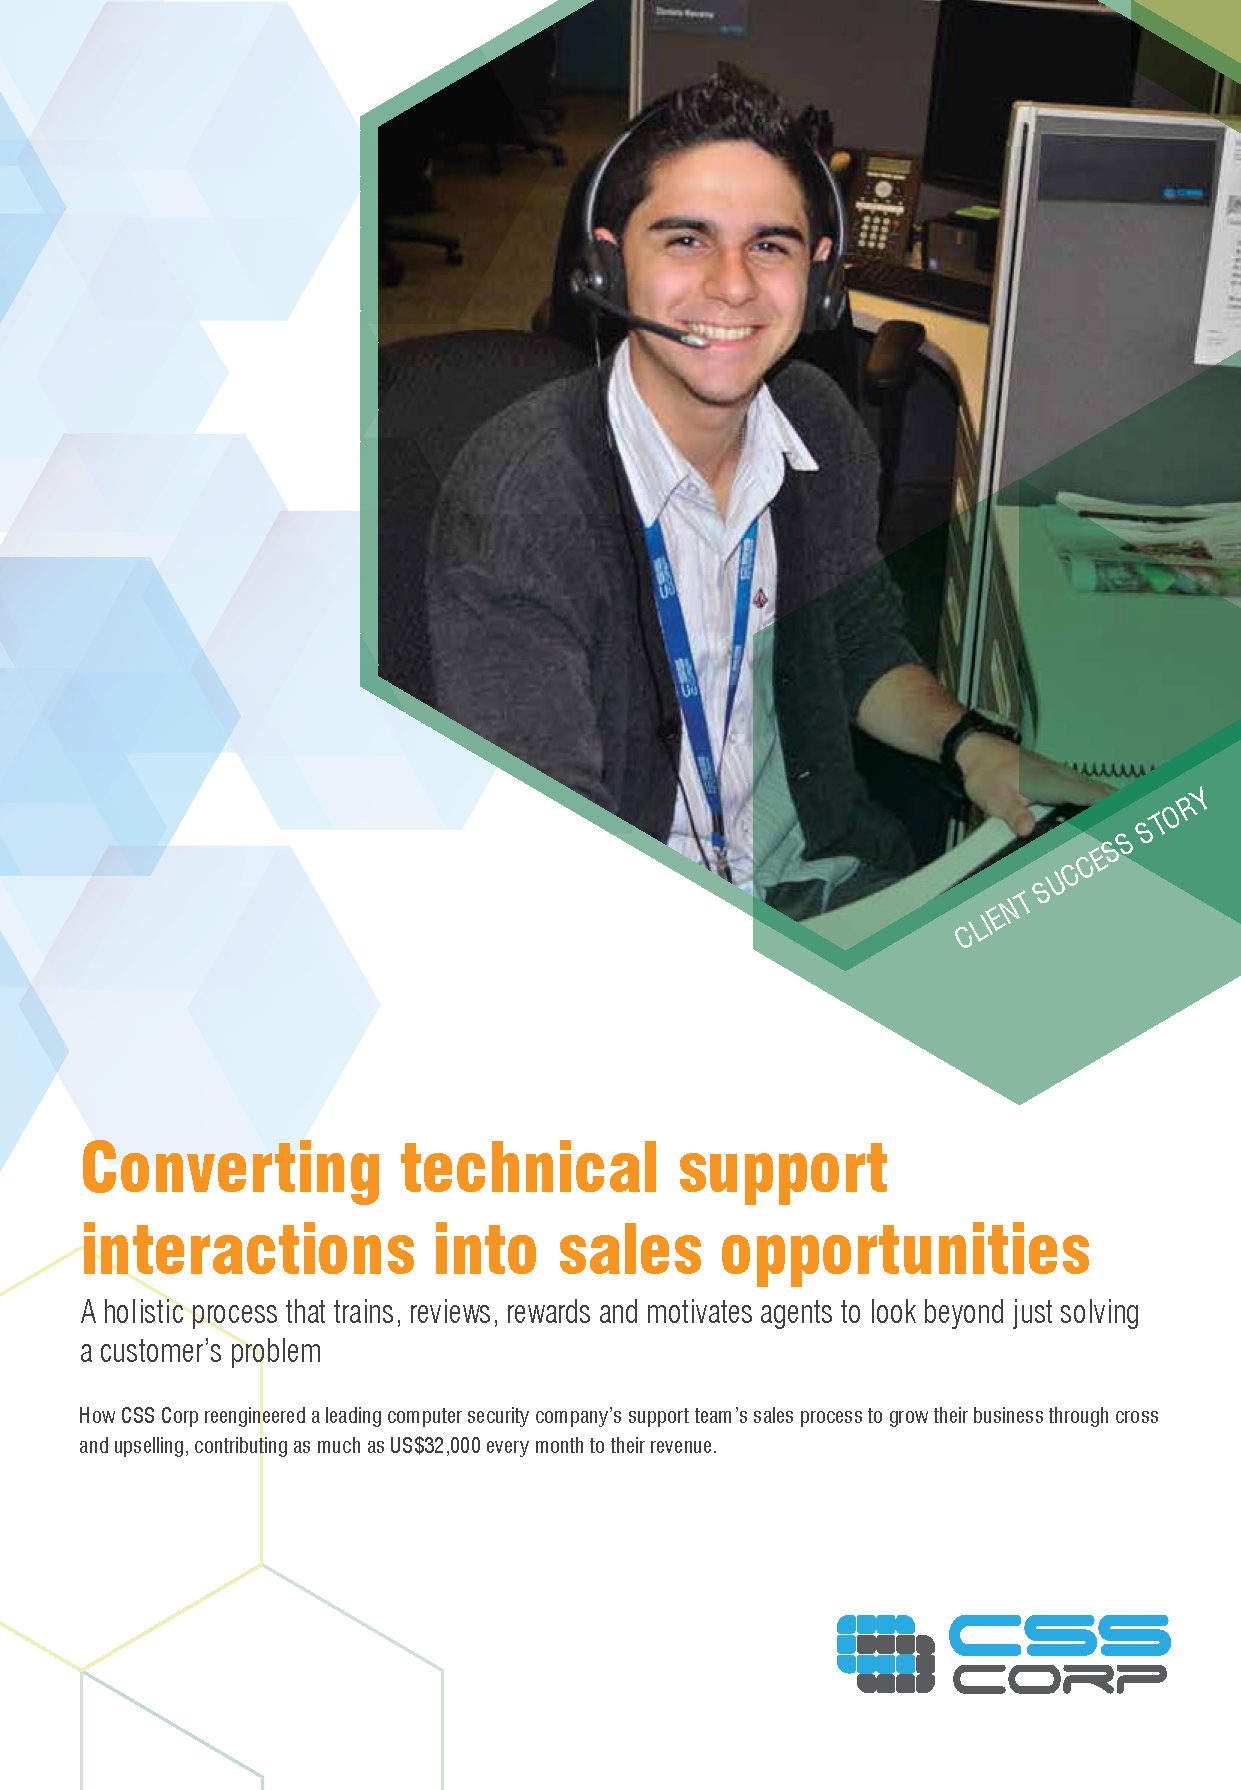 Converting technical support interactions into a sales opportunity